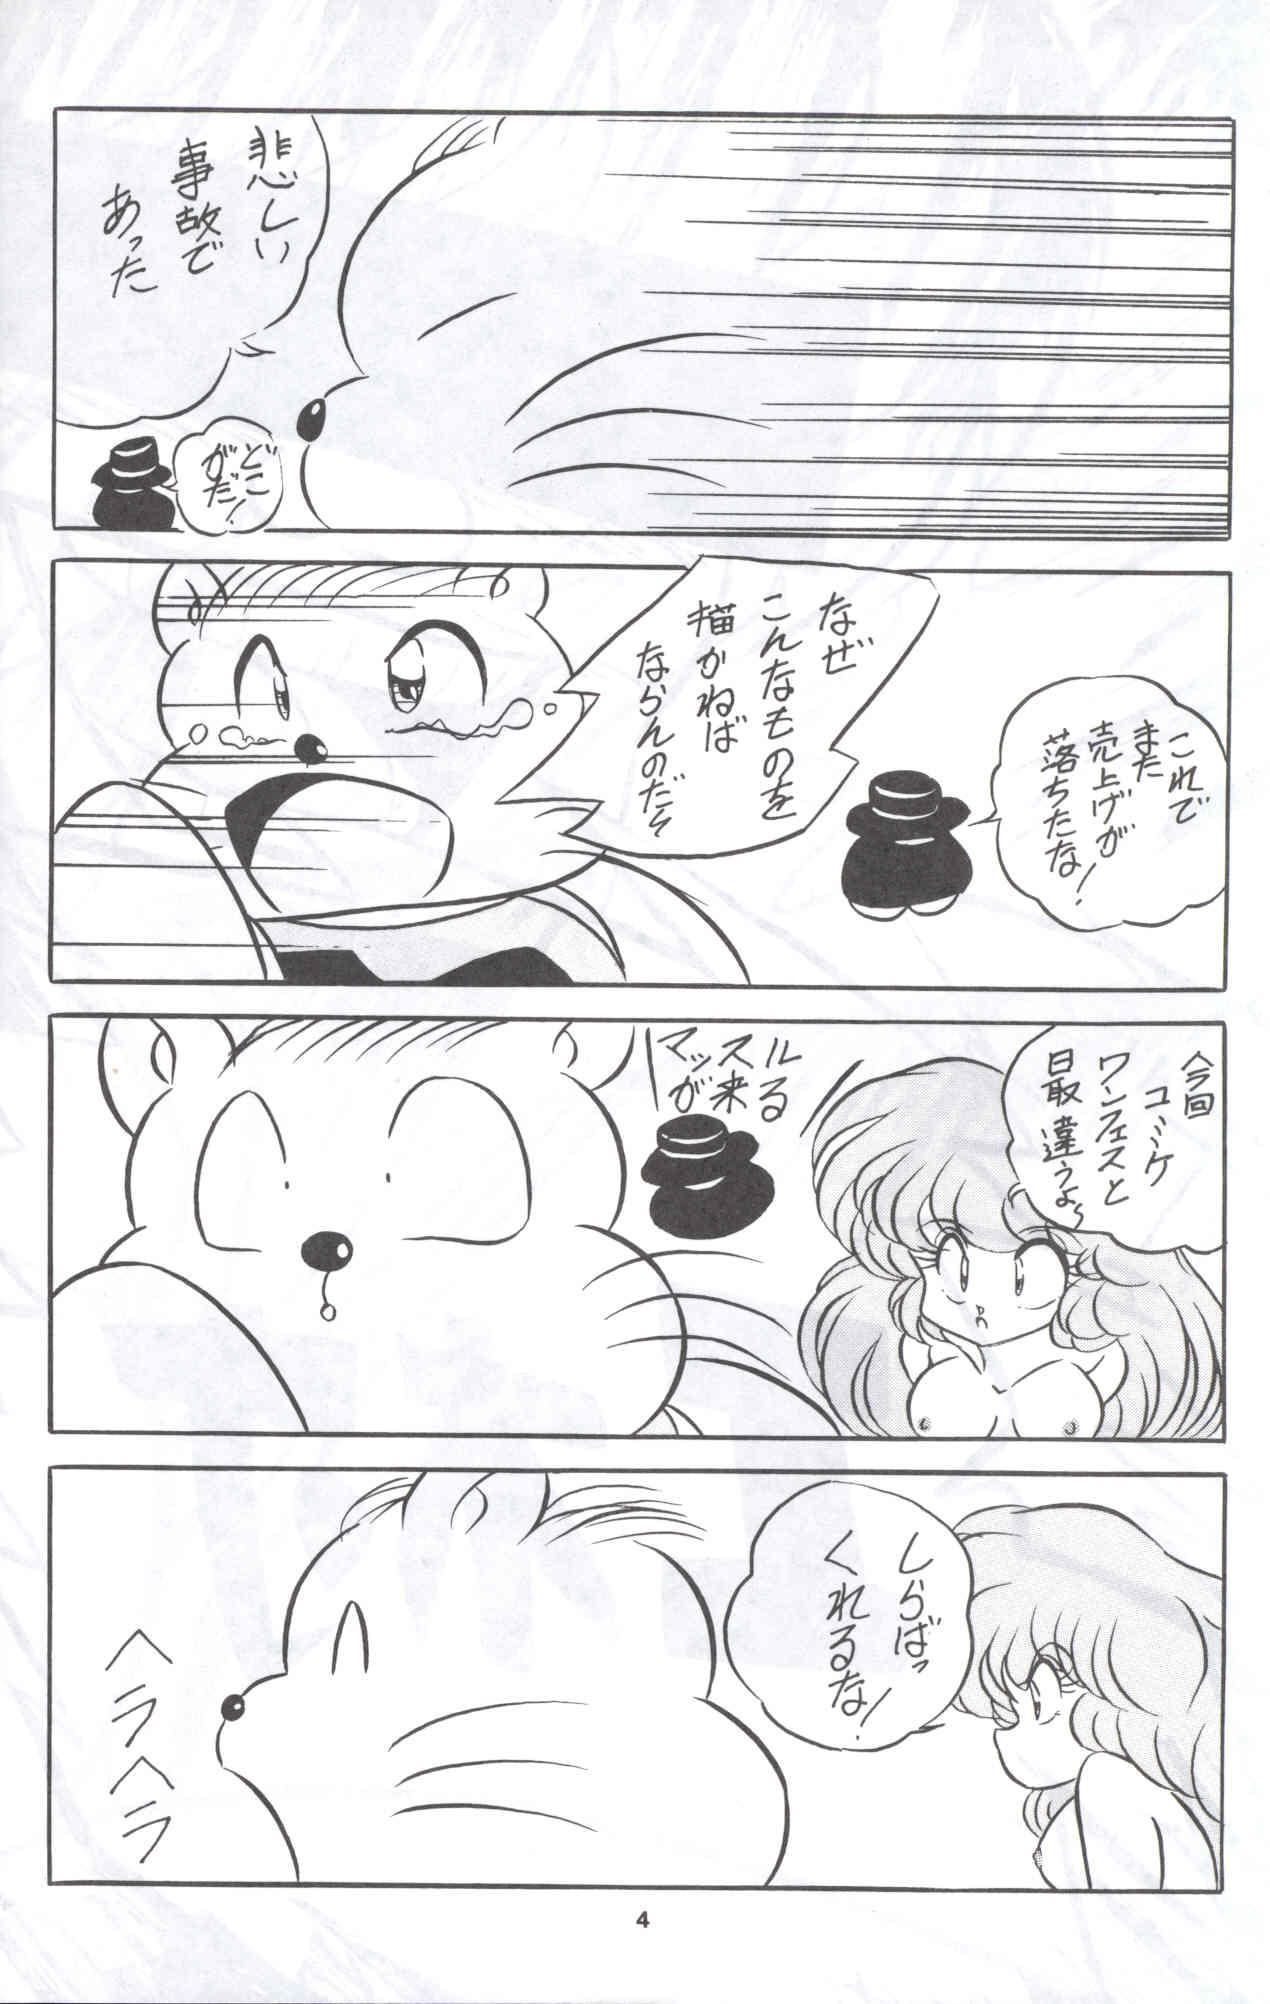 Best Blowjobs C-COMPANY SPECIAL STAGE 12 - Sailor moon Ranma 12 Urusei yatsura Dirty - Page 5